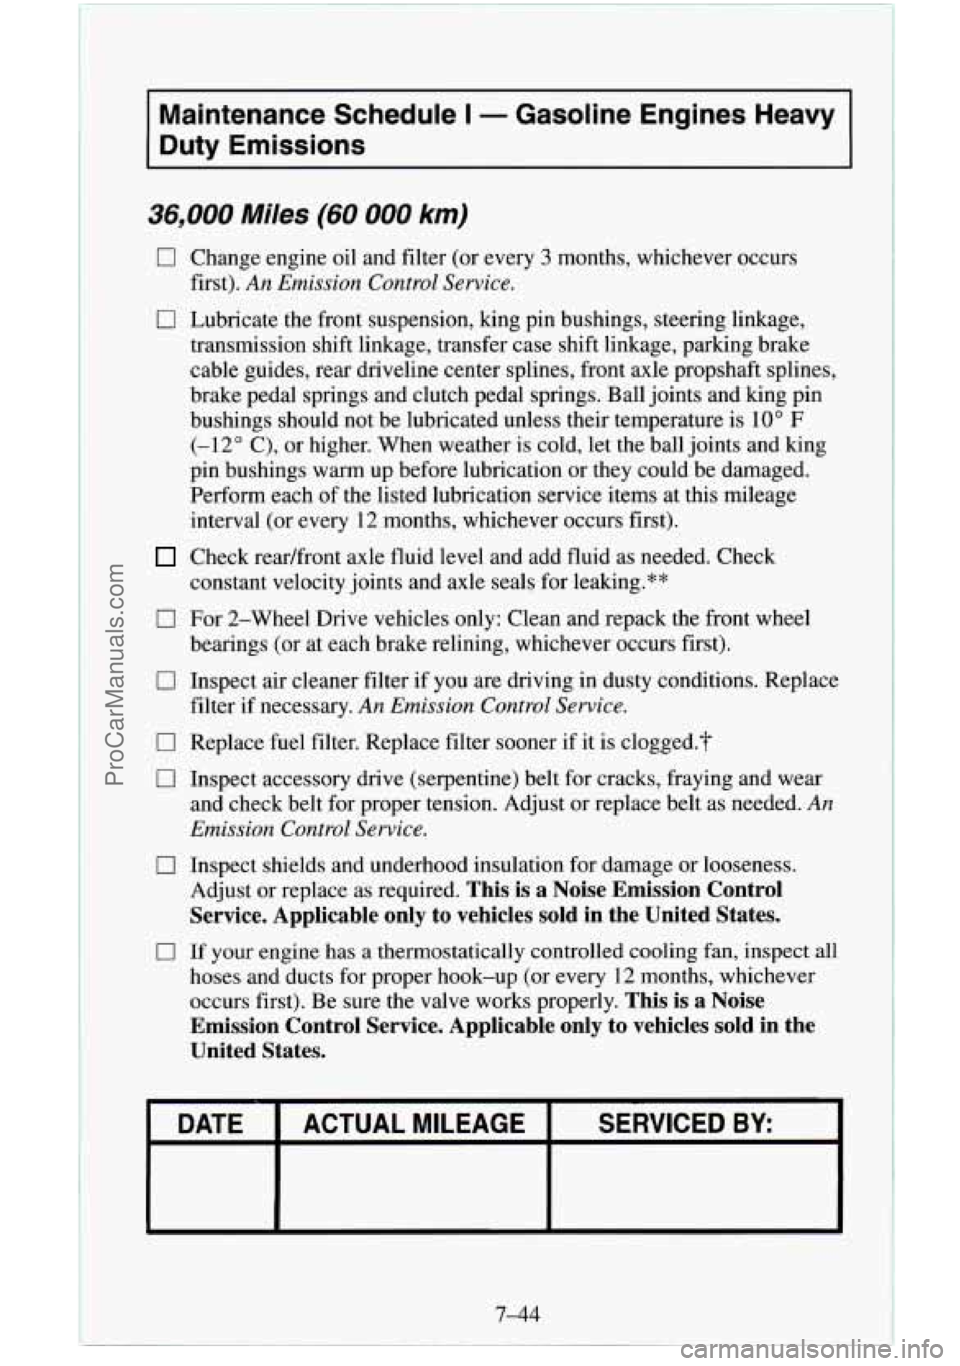 CHEVROLET SUBURBAN 1995 Service Manual Maintenance  Schedule I - Gasoline  Engines  Heavy 
Duty  Emissions 
36,000 Miles (60 000 km) 
0 
0 
0 
0 
0 
0 
0 
0 
Change  engine oil and filter  (or every 3 months, whichever  occurs 
first). 
An